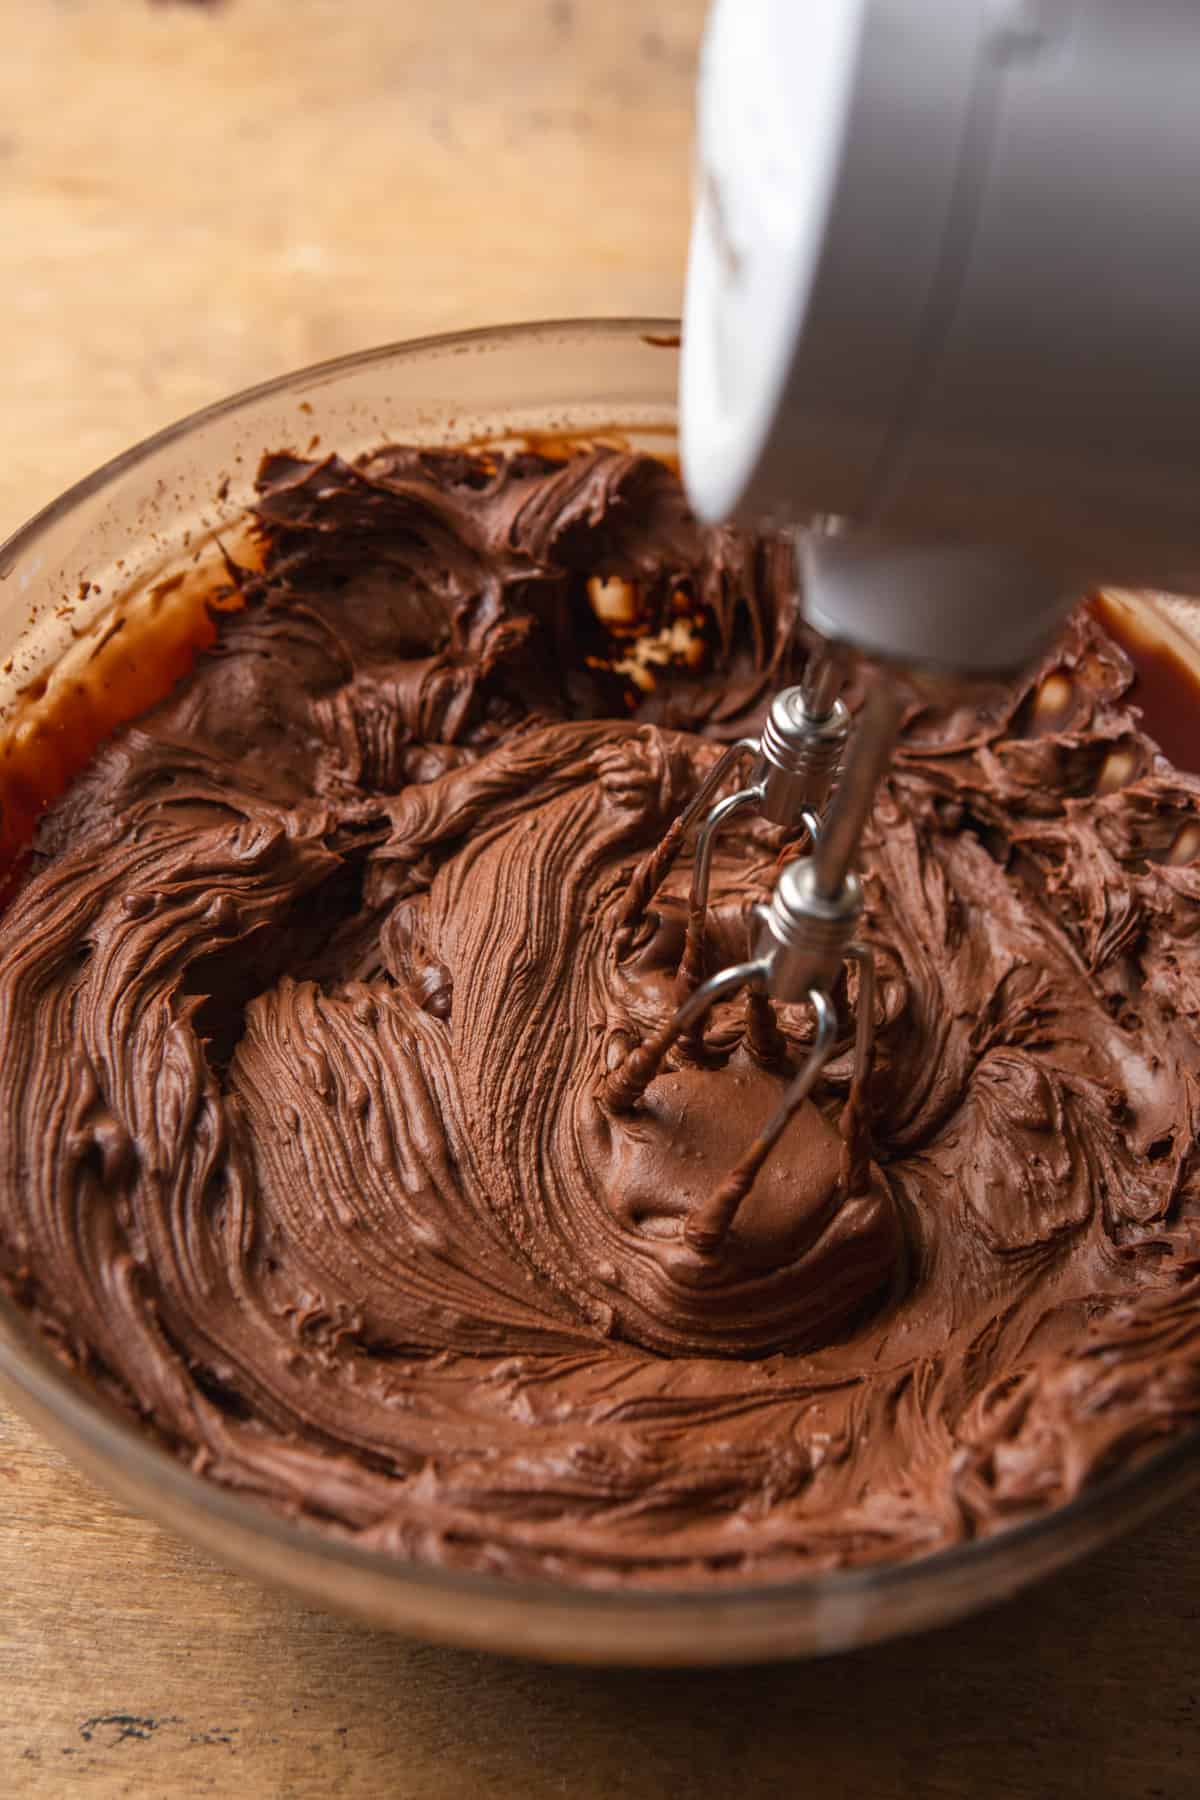 Mixing ganache with a hand mixer in a glass bowl.